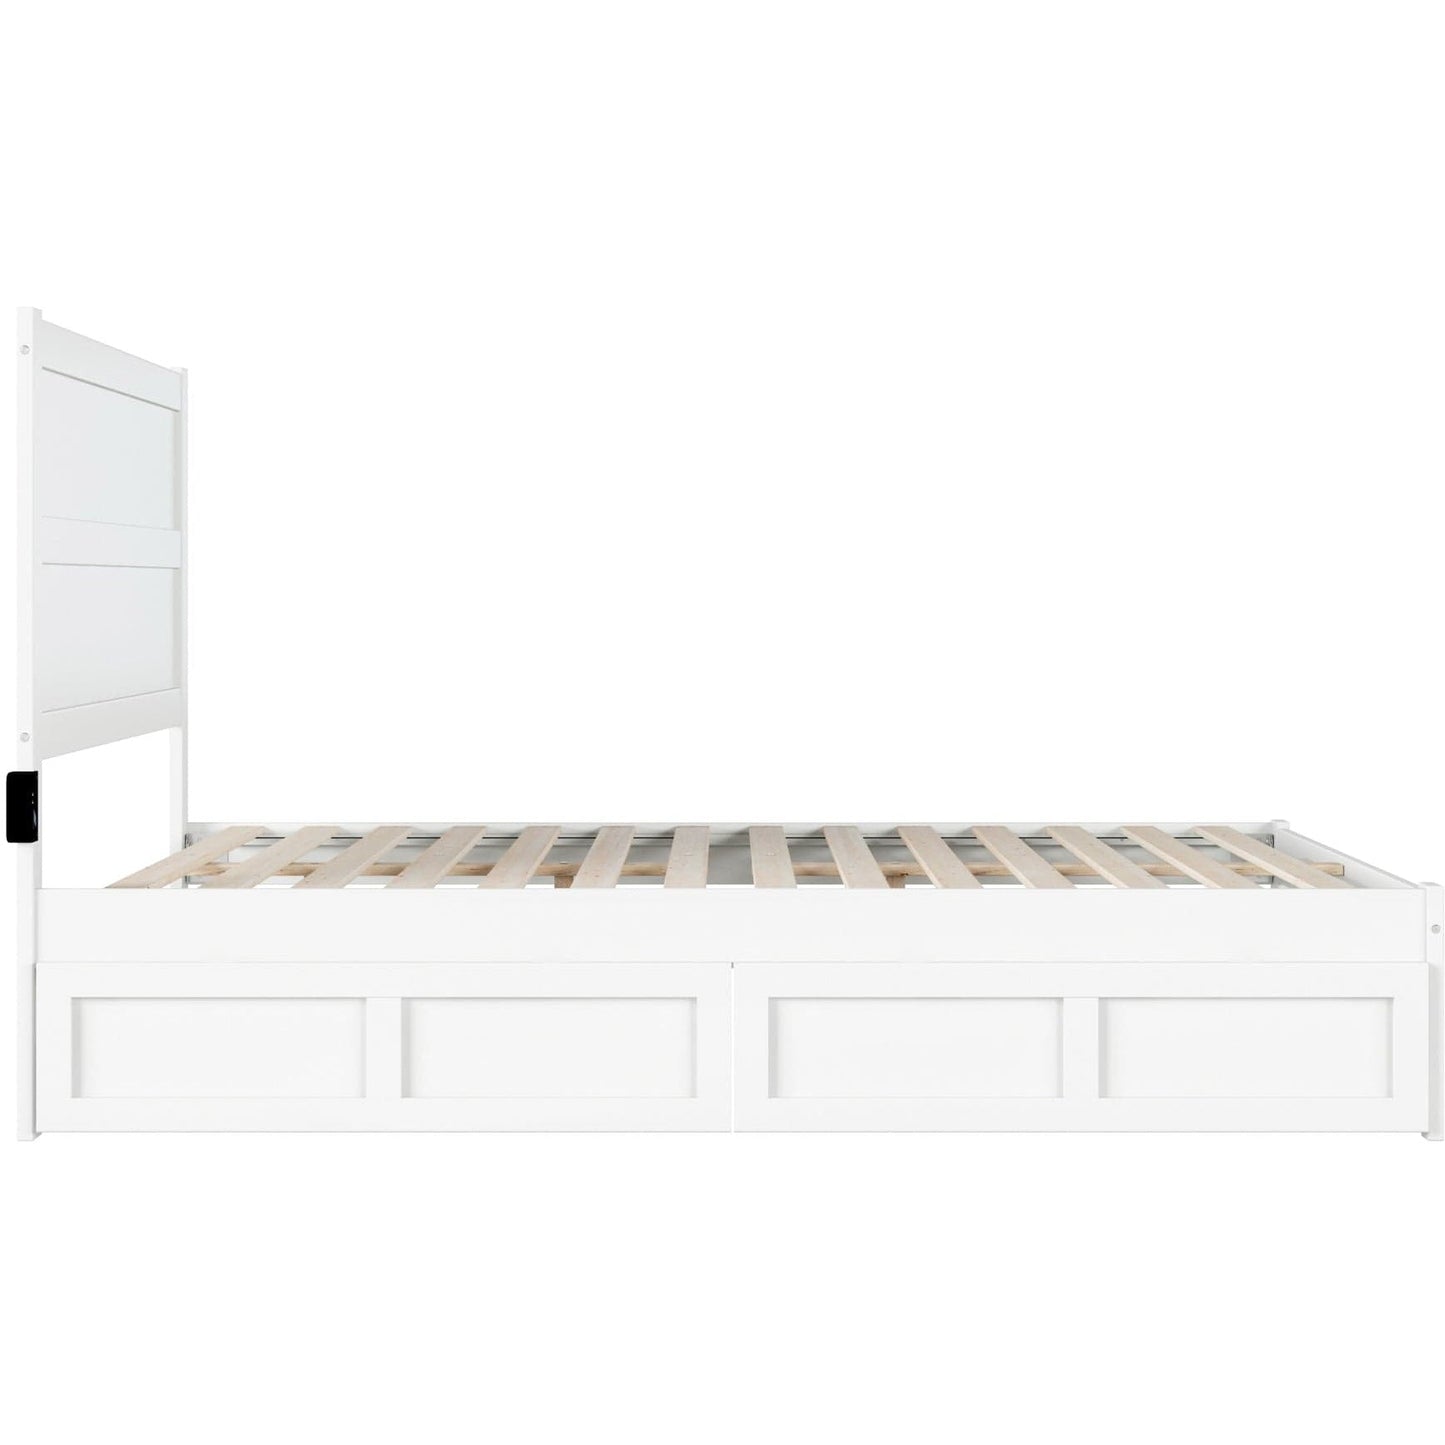 AFI Furnishings NoHo Queen Bed with 2 Drawers in White AG9113442